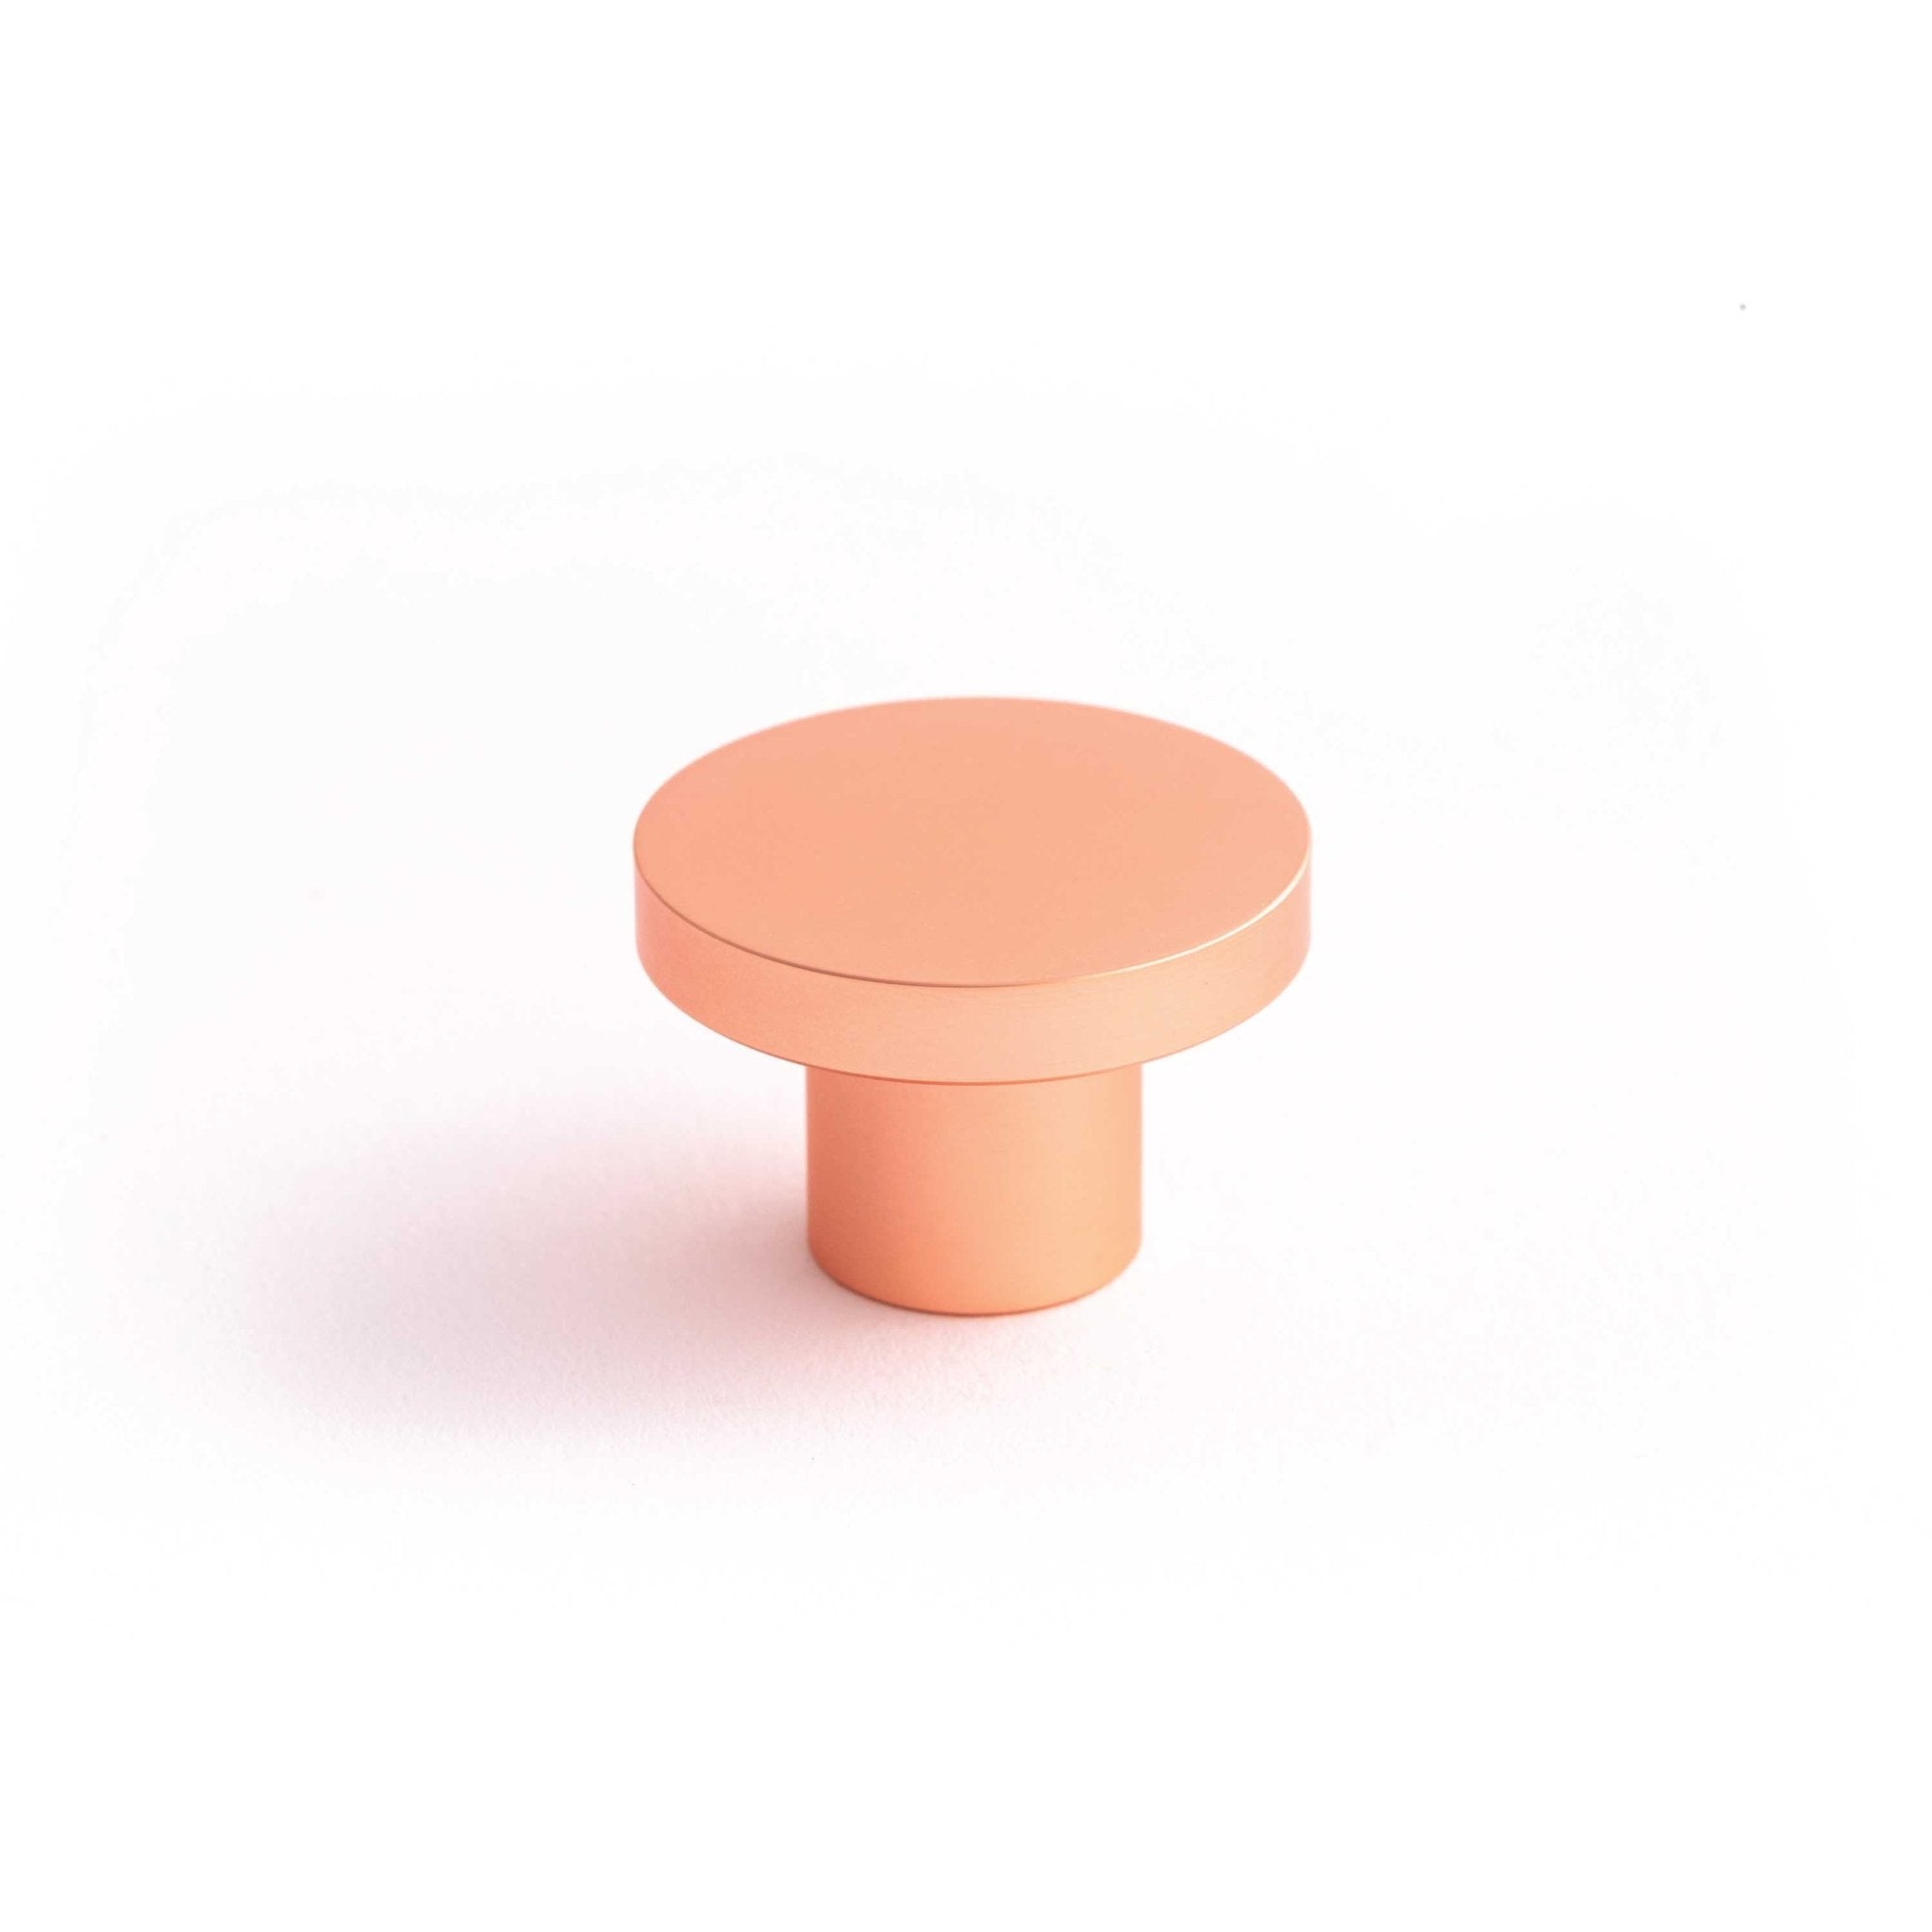 Disk 30mm Knob-Satin Copper--The Hairpin Leg Co.